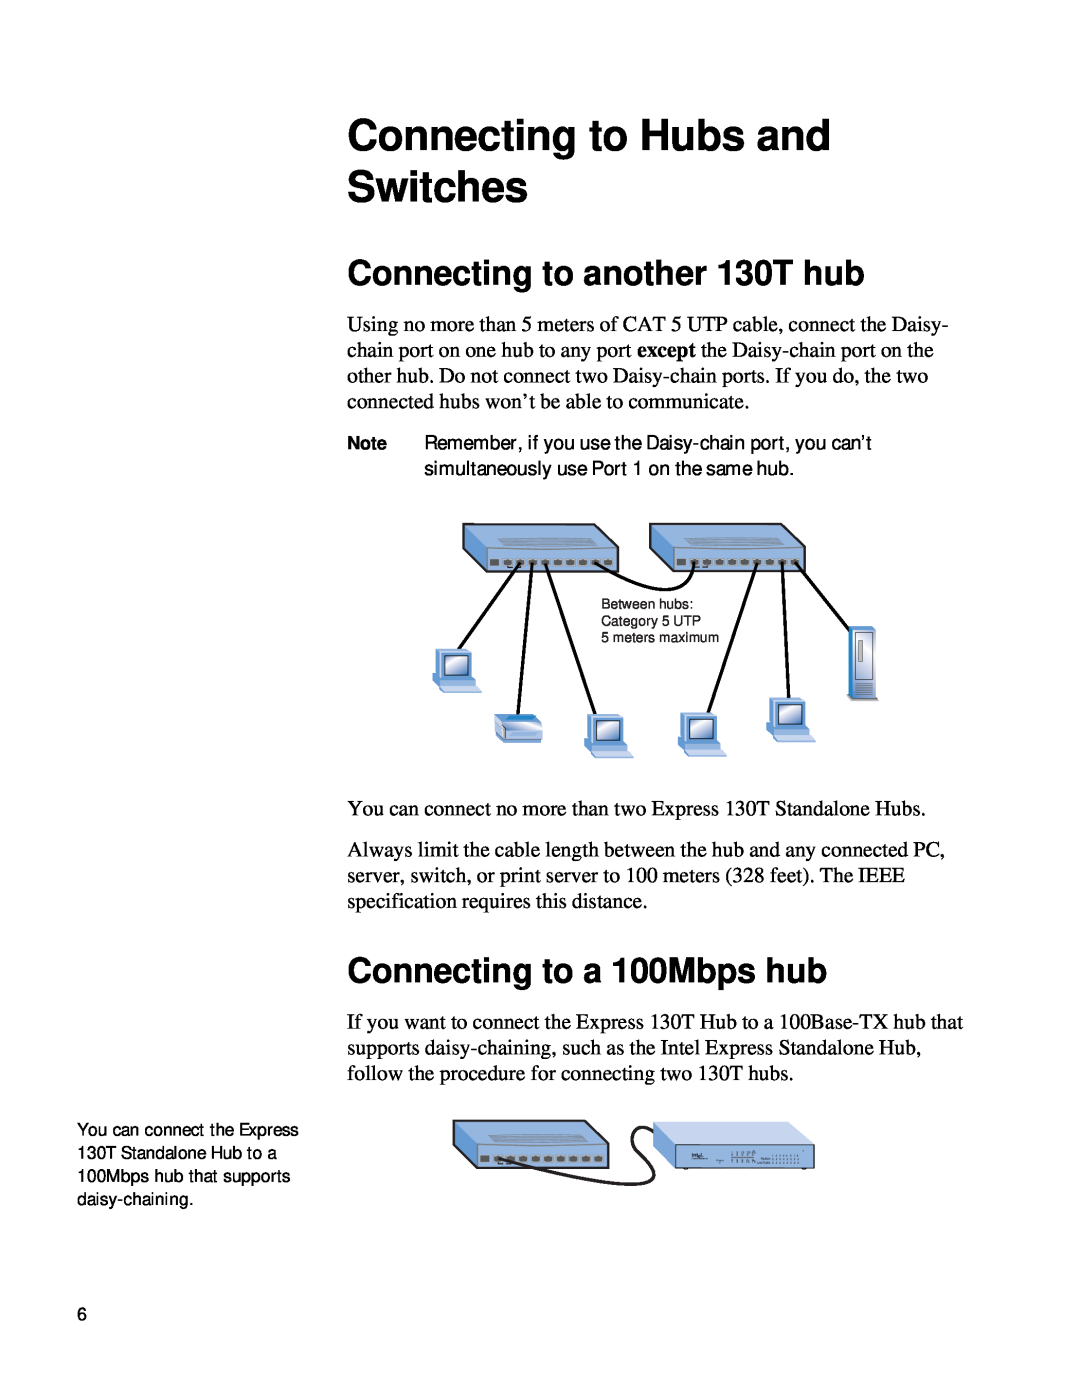 Intel manual Connecting to Hubs and Switches, Connecting to another 130T hub, Connecting to a 100Mbps hub 